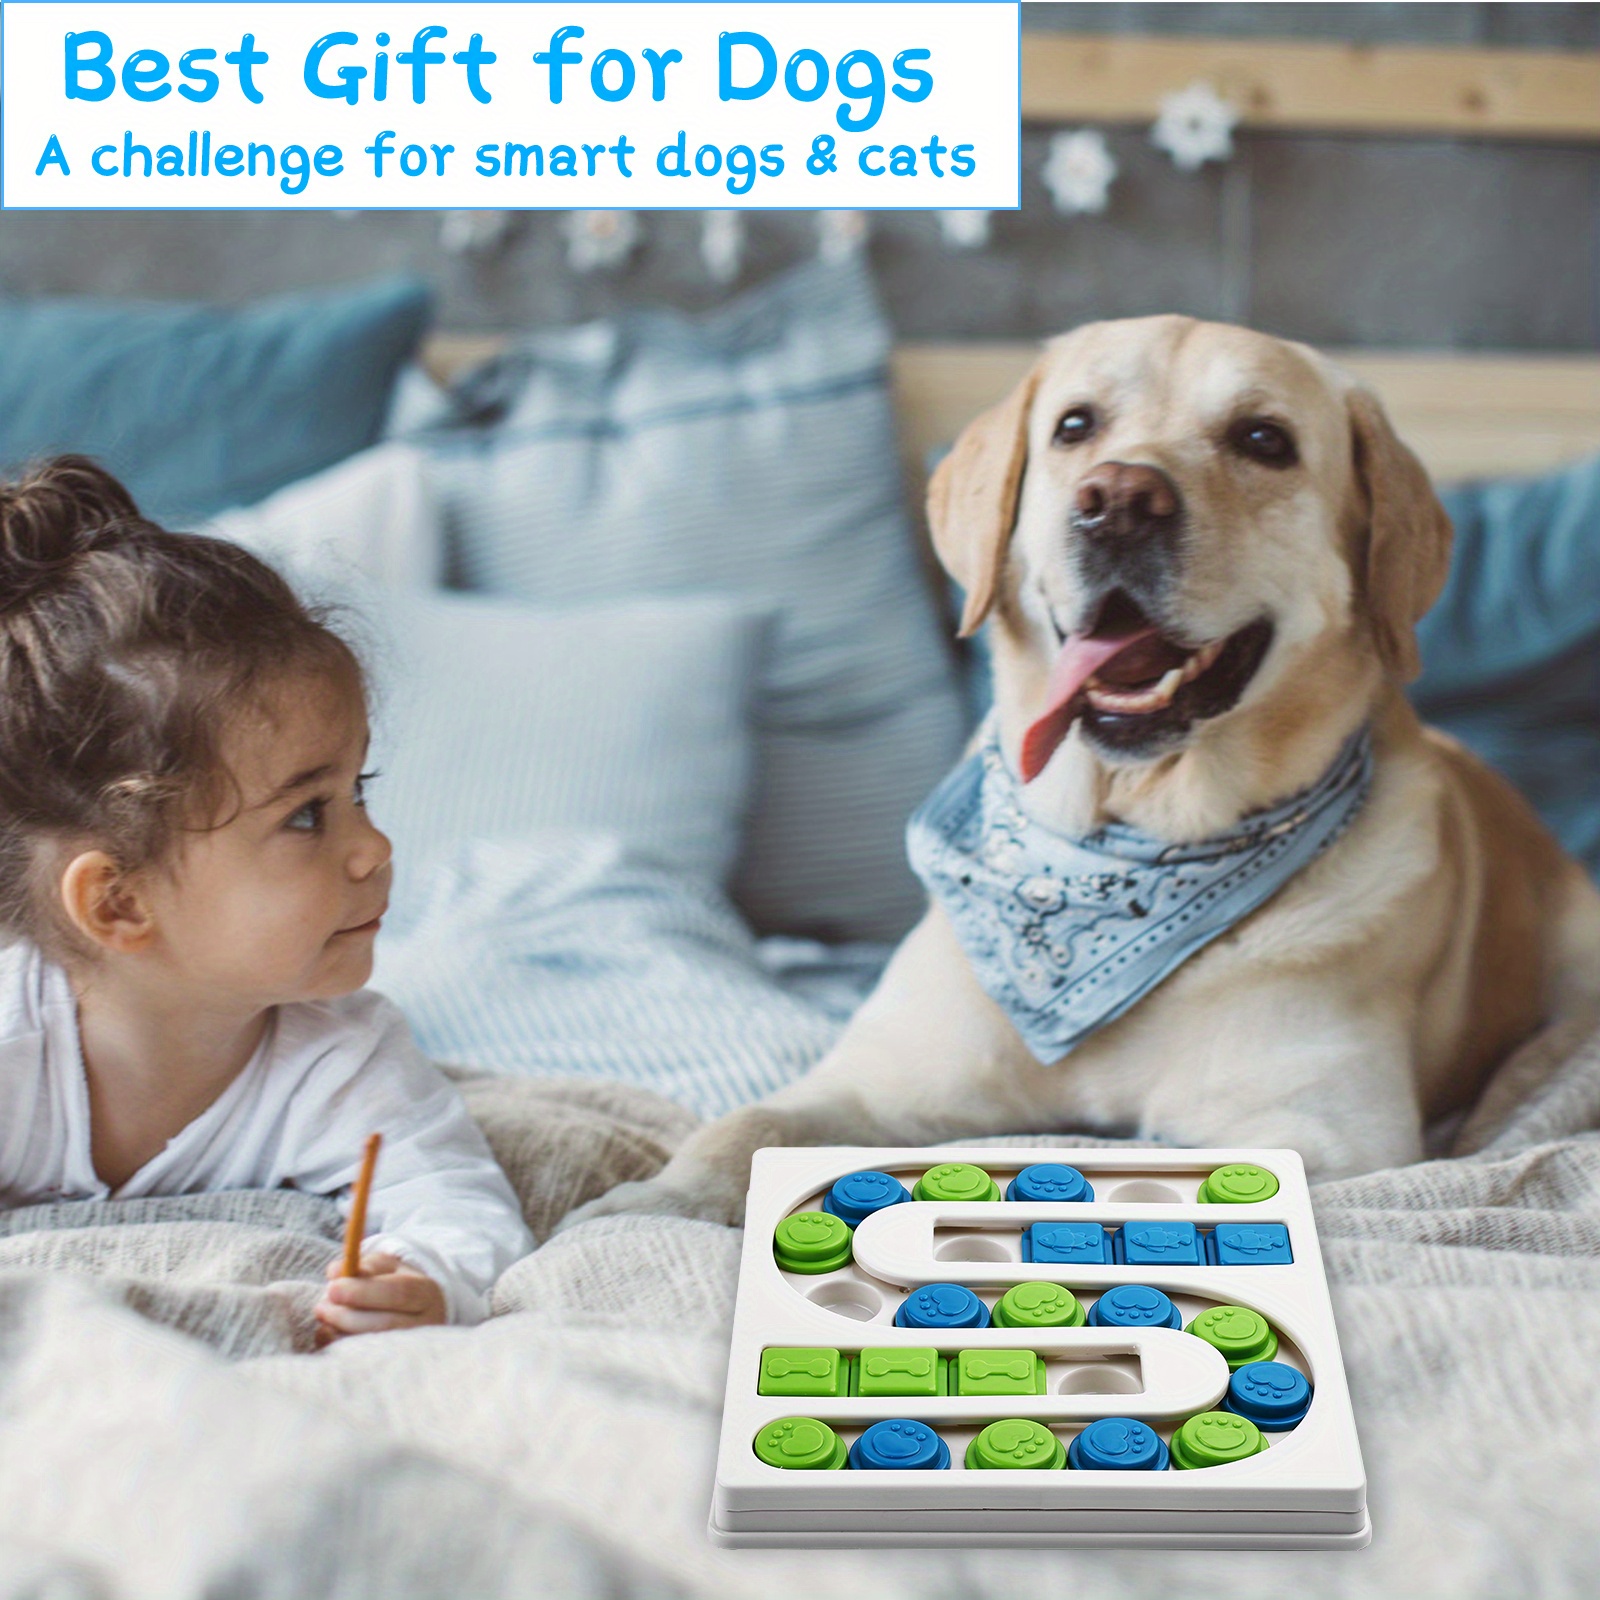 Iq-boosting Interactive Dog Puzzle Toys - Stimulate Your Dog's